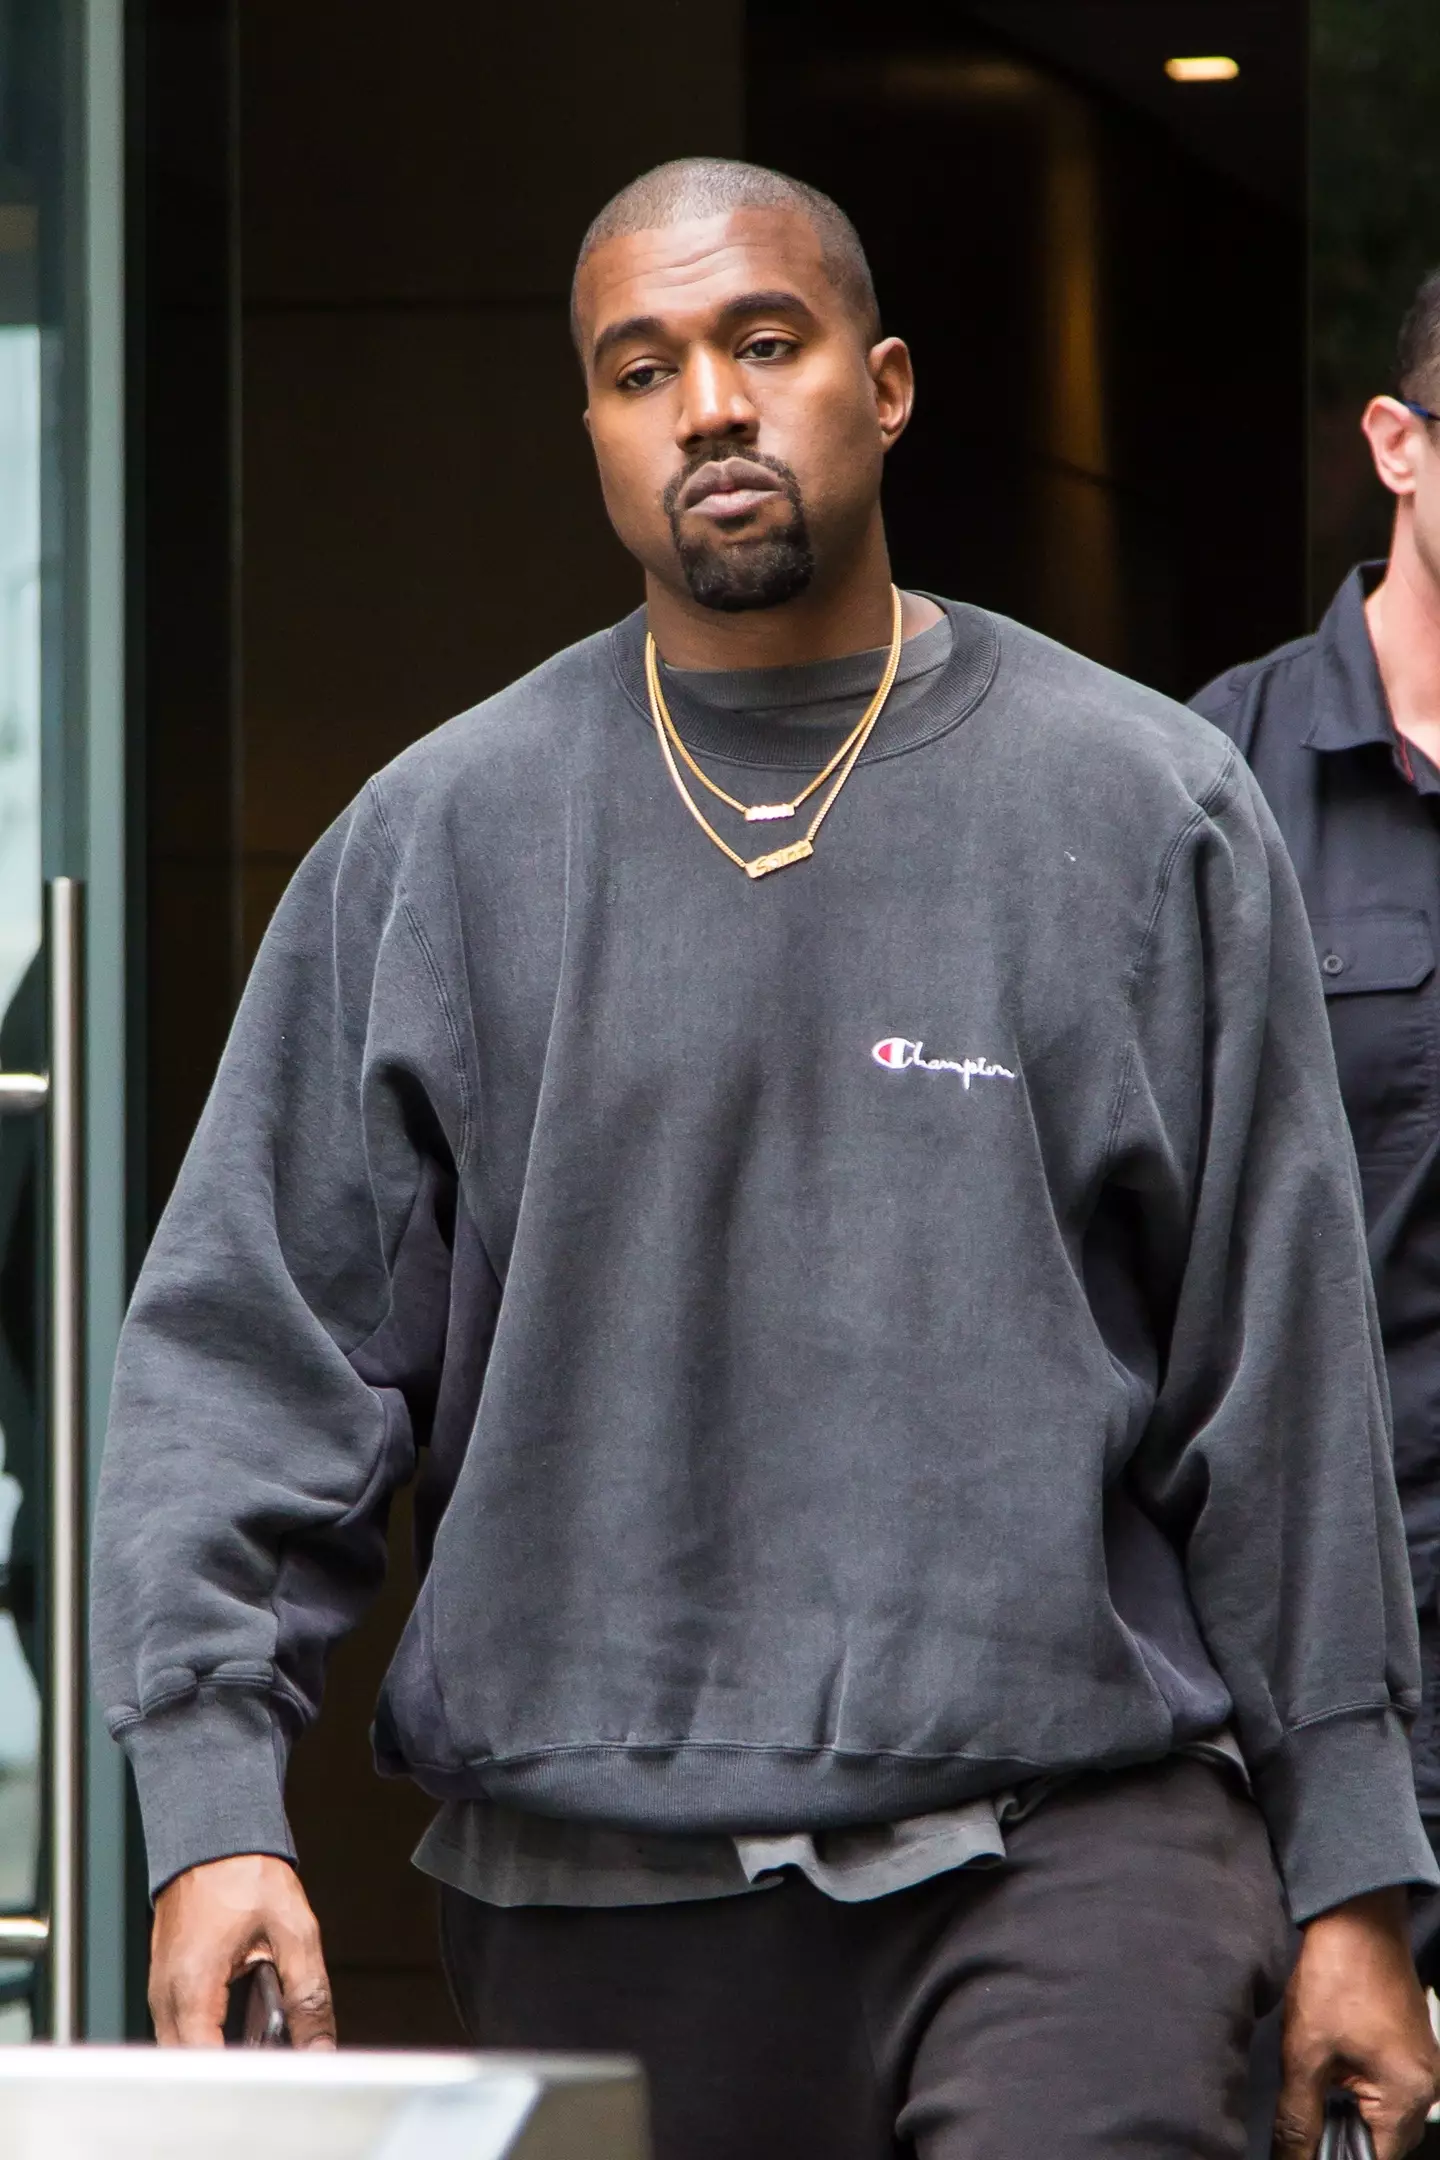 Ye called the shoe ‘a fake Yeezy made by Adidas themselves’.